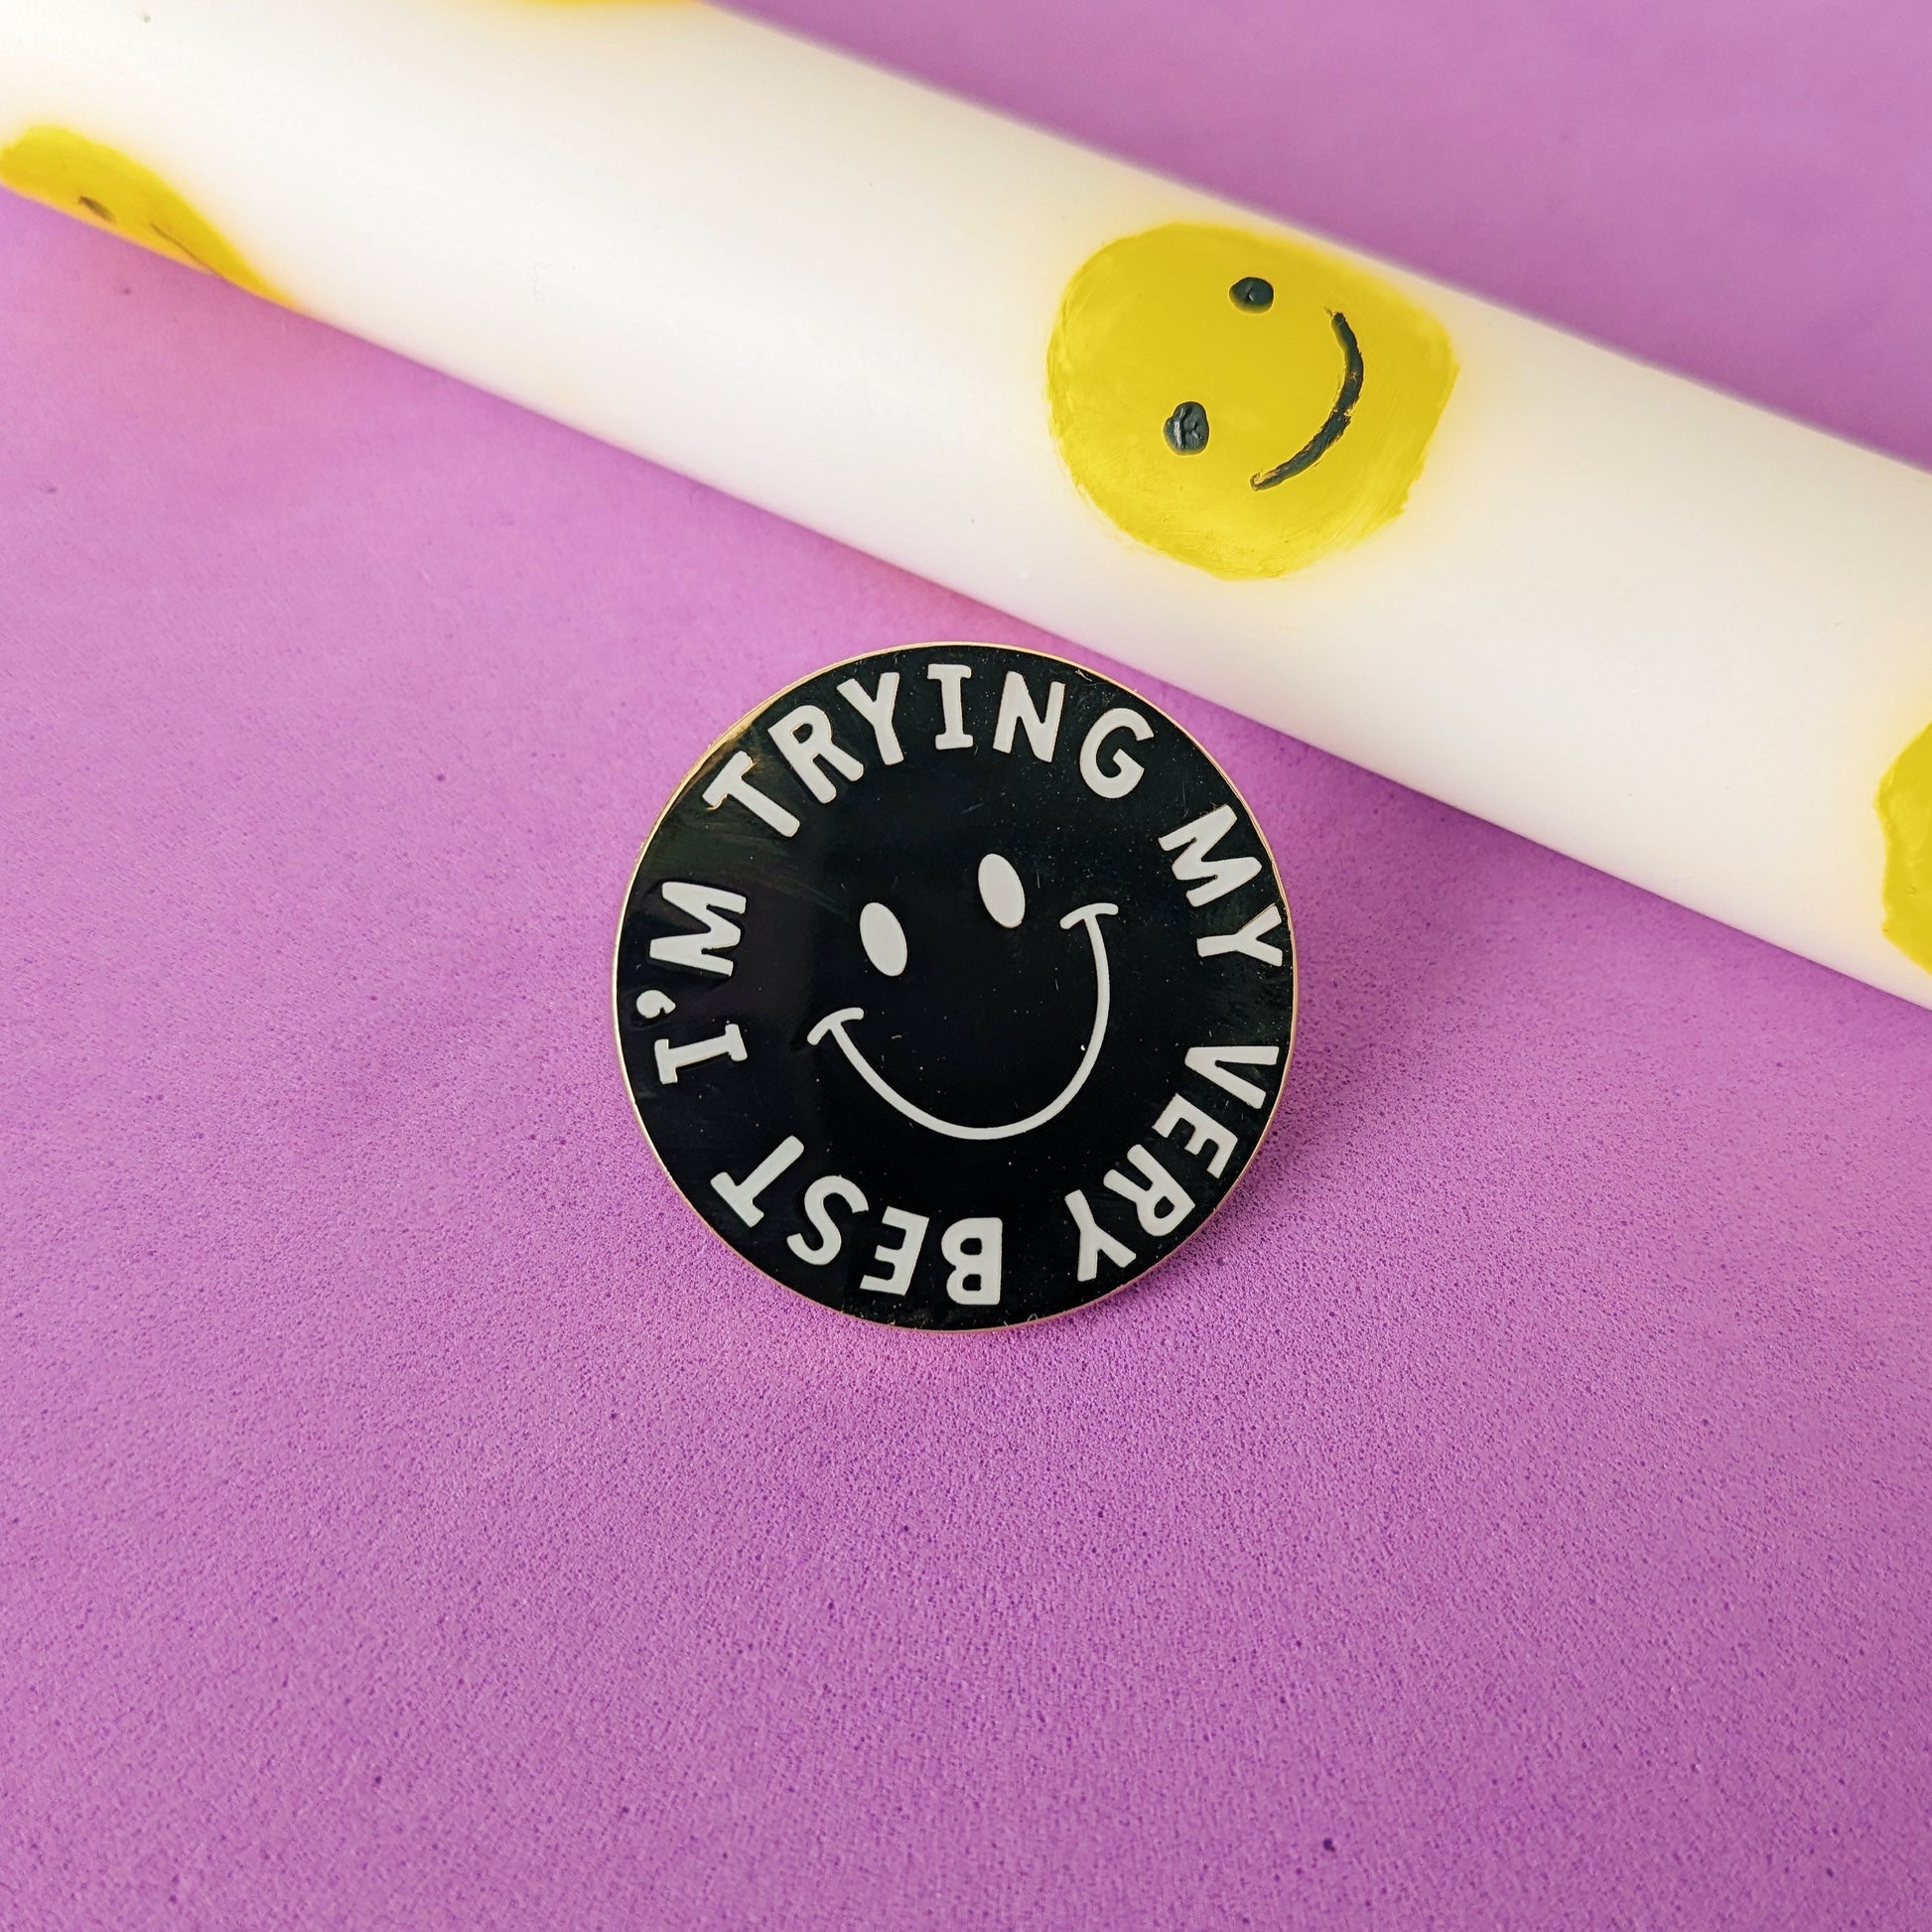 mental health enamel pin badge. The perfect gift for students or a great mental health gift